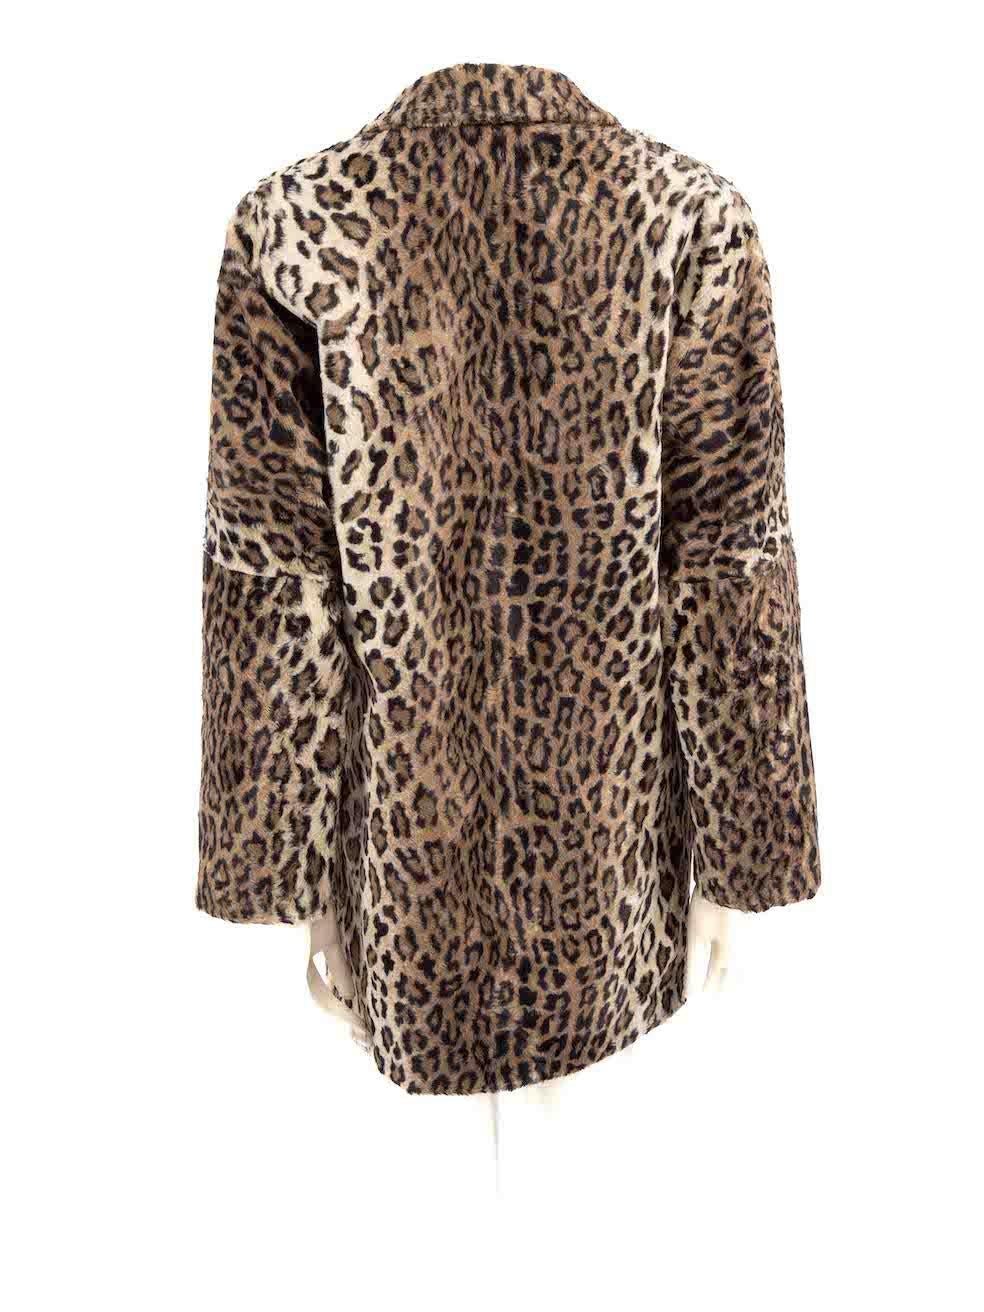 Redemption Brown Faux Fur Leopard Print Coat Size S In Good Condition For Sale In London, GB